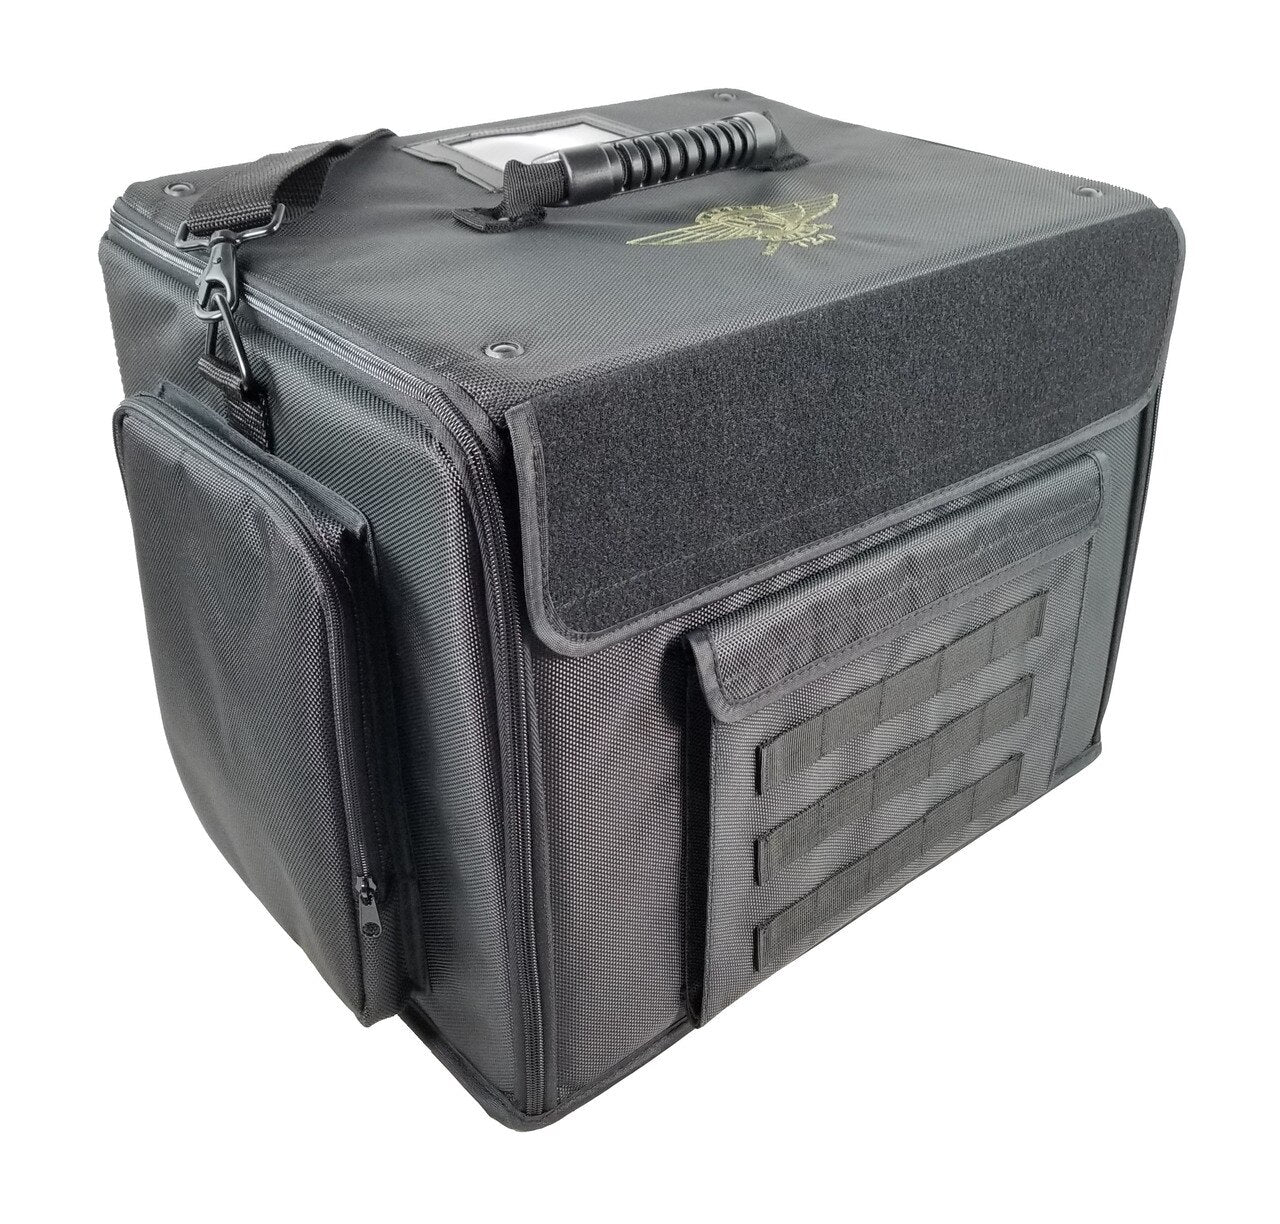 P.A.C.K. 720 Molle with Magna Rack Sliders Load Out Battle Foam Battle Foam    | Red Claw Gaming